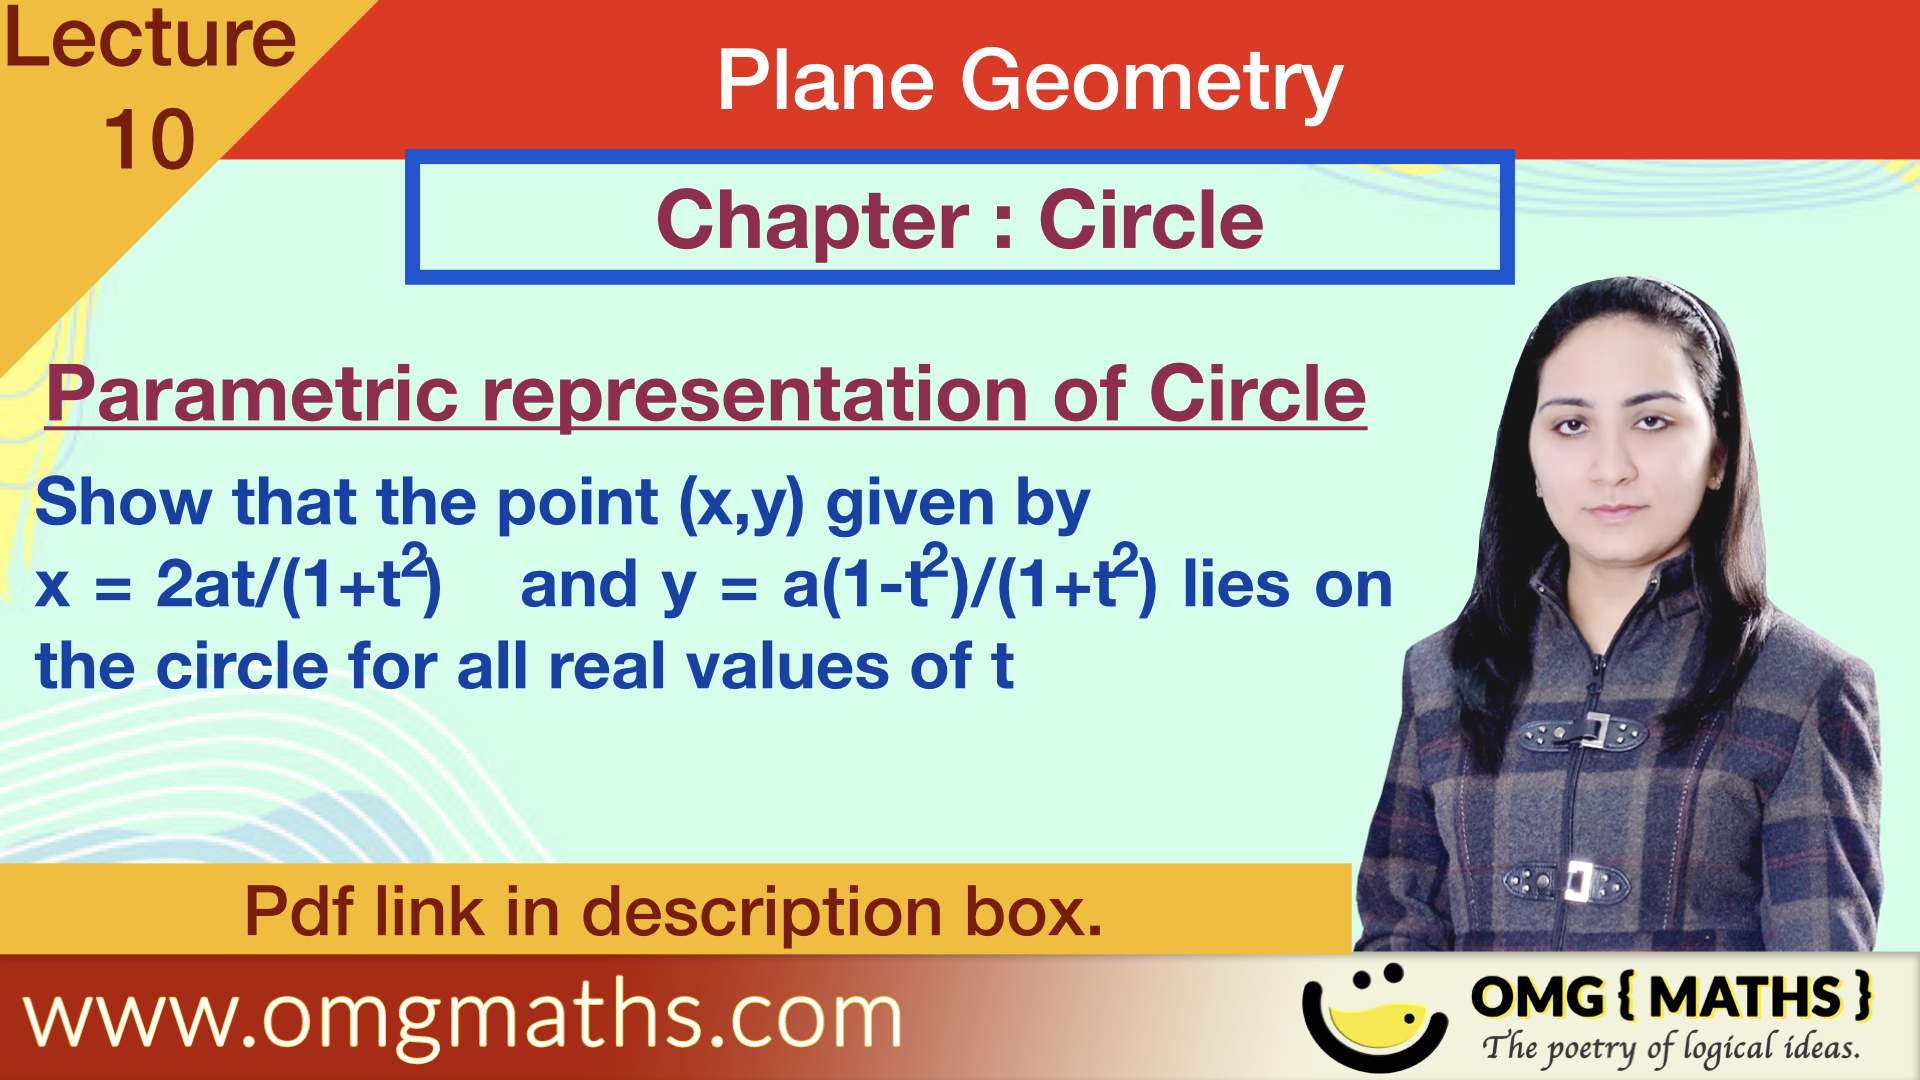 Parametric equation of Circle | Examples | Plane Geometry | bsc maths